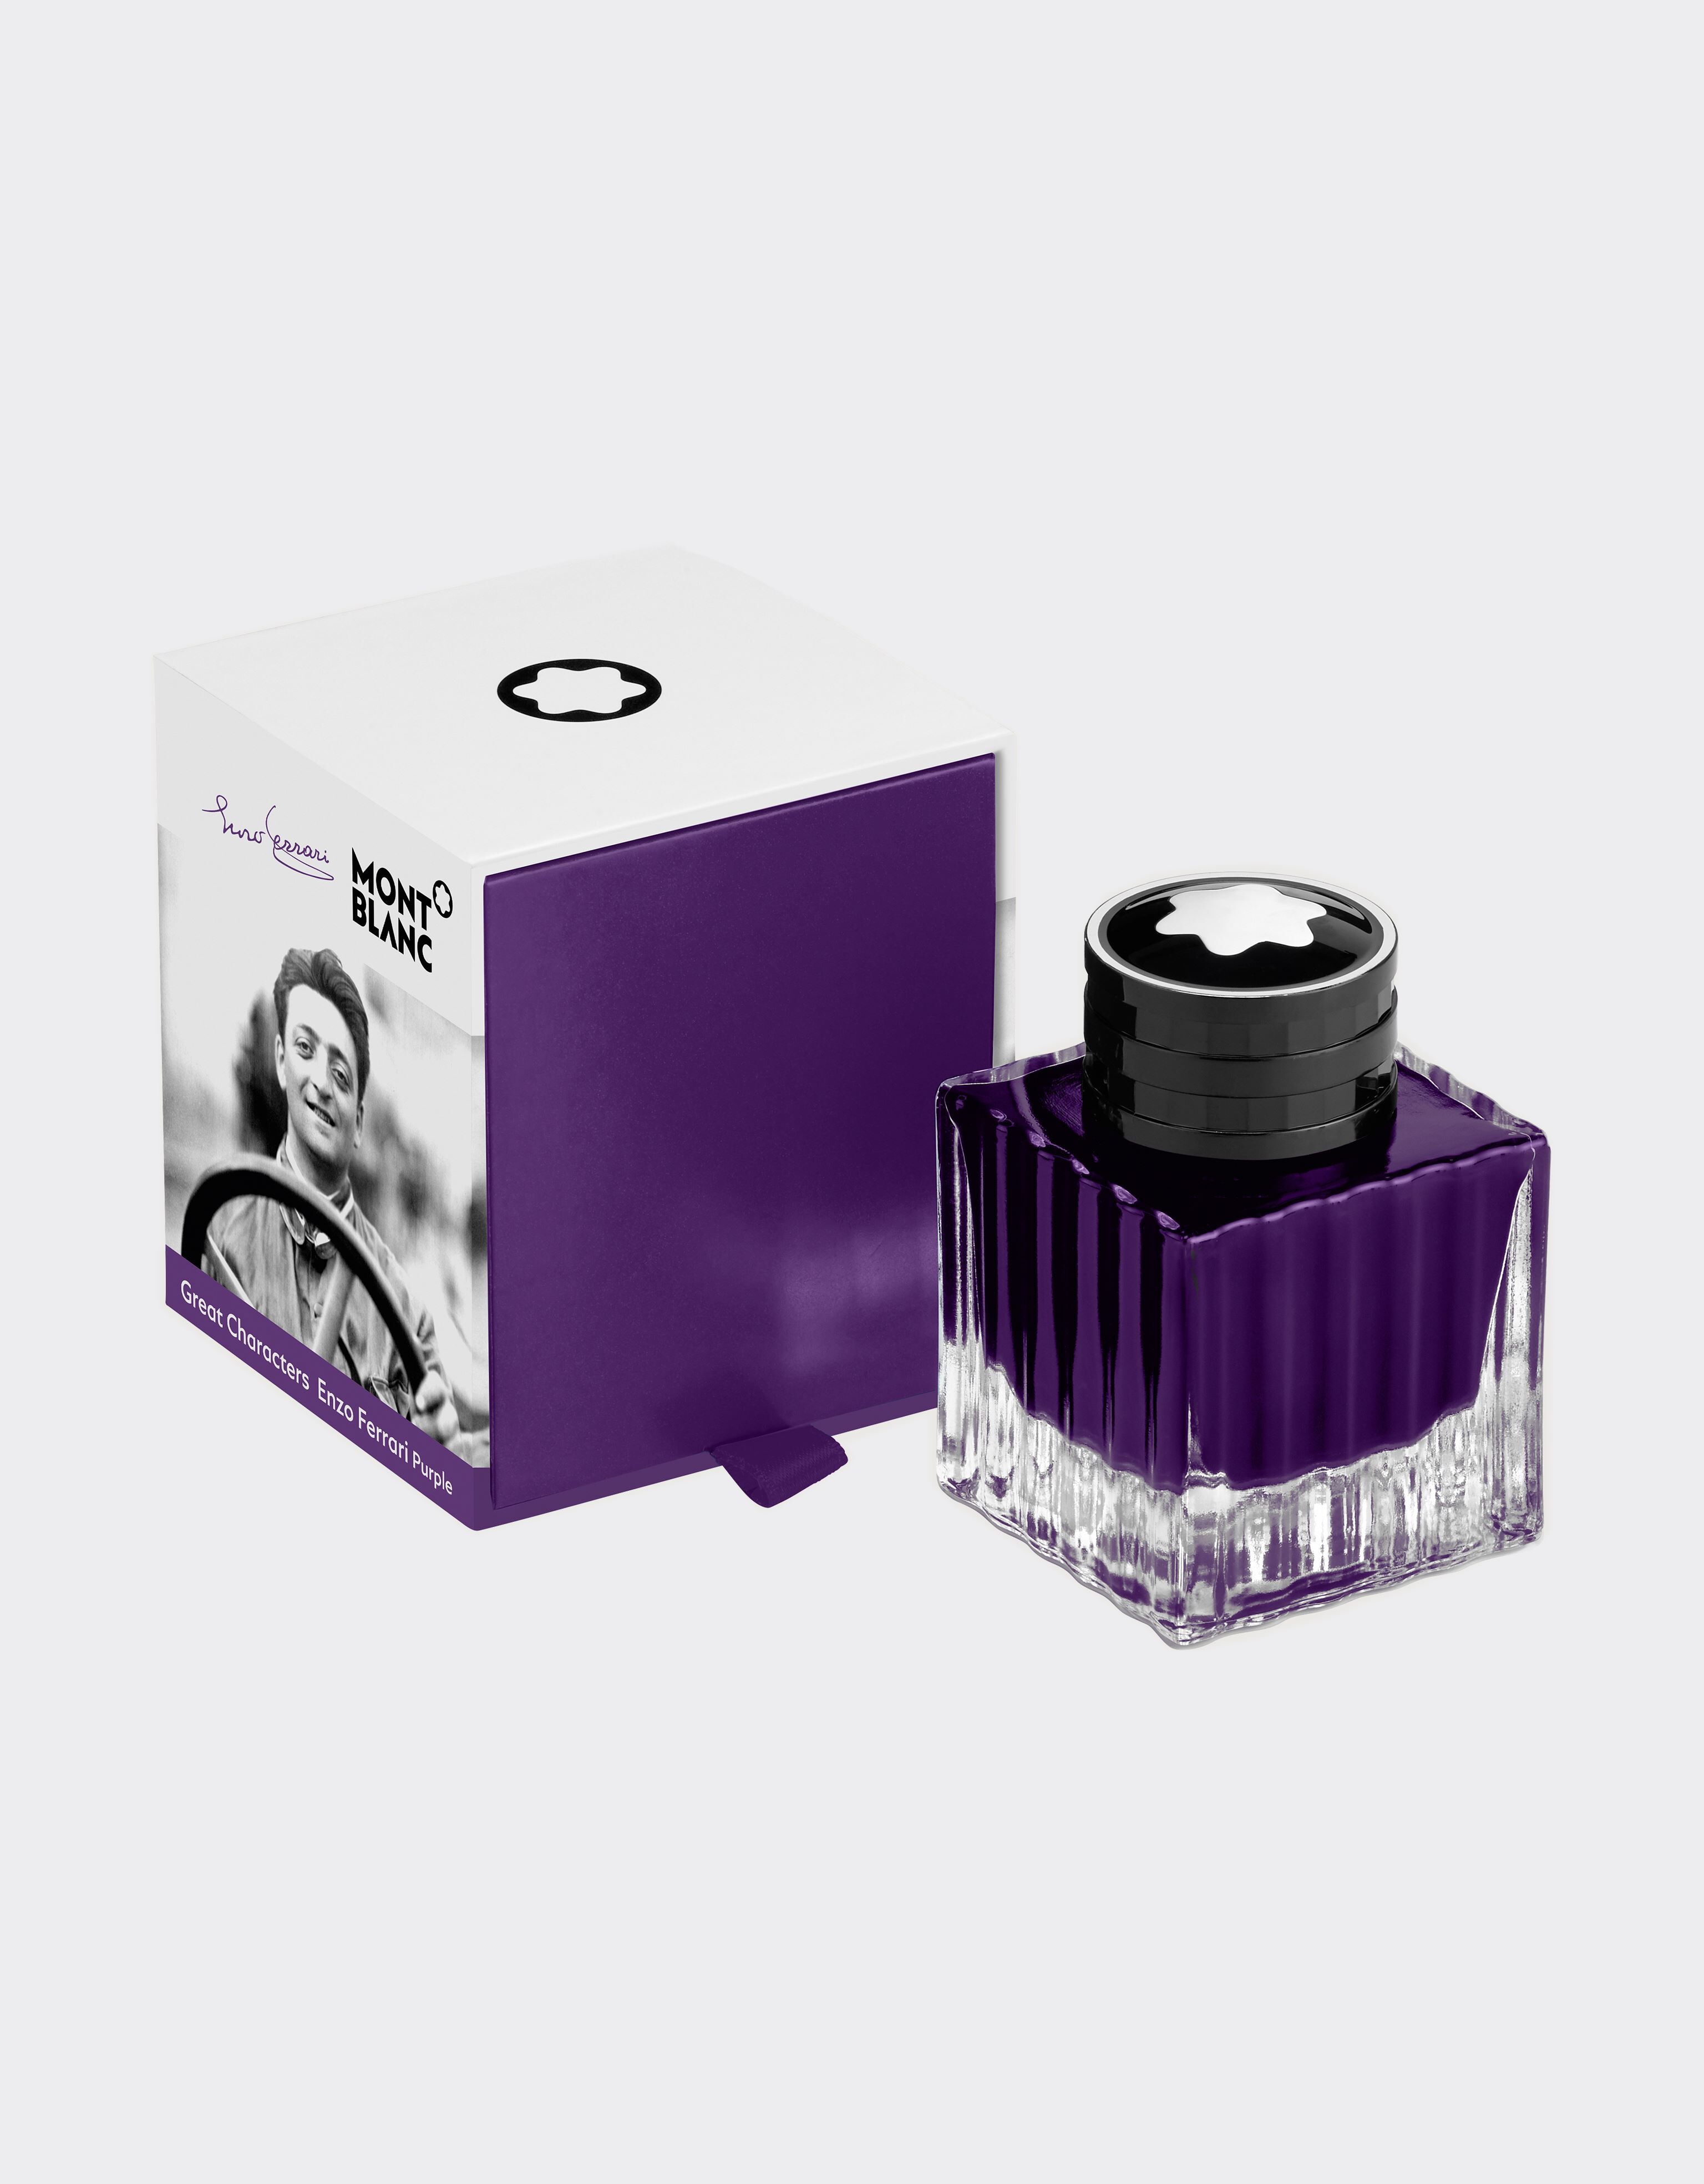 ${brand} Montblanc Great Characters Enzo Ferrari Special Edition ink bottle ${colorDescription} ${masterID}